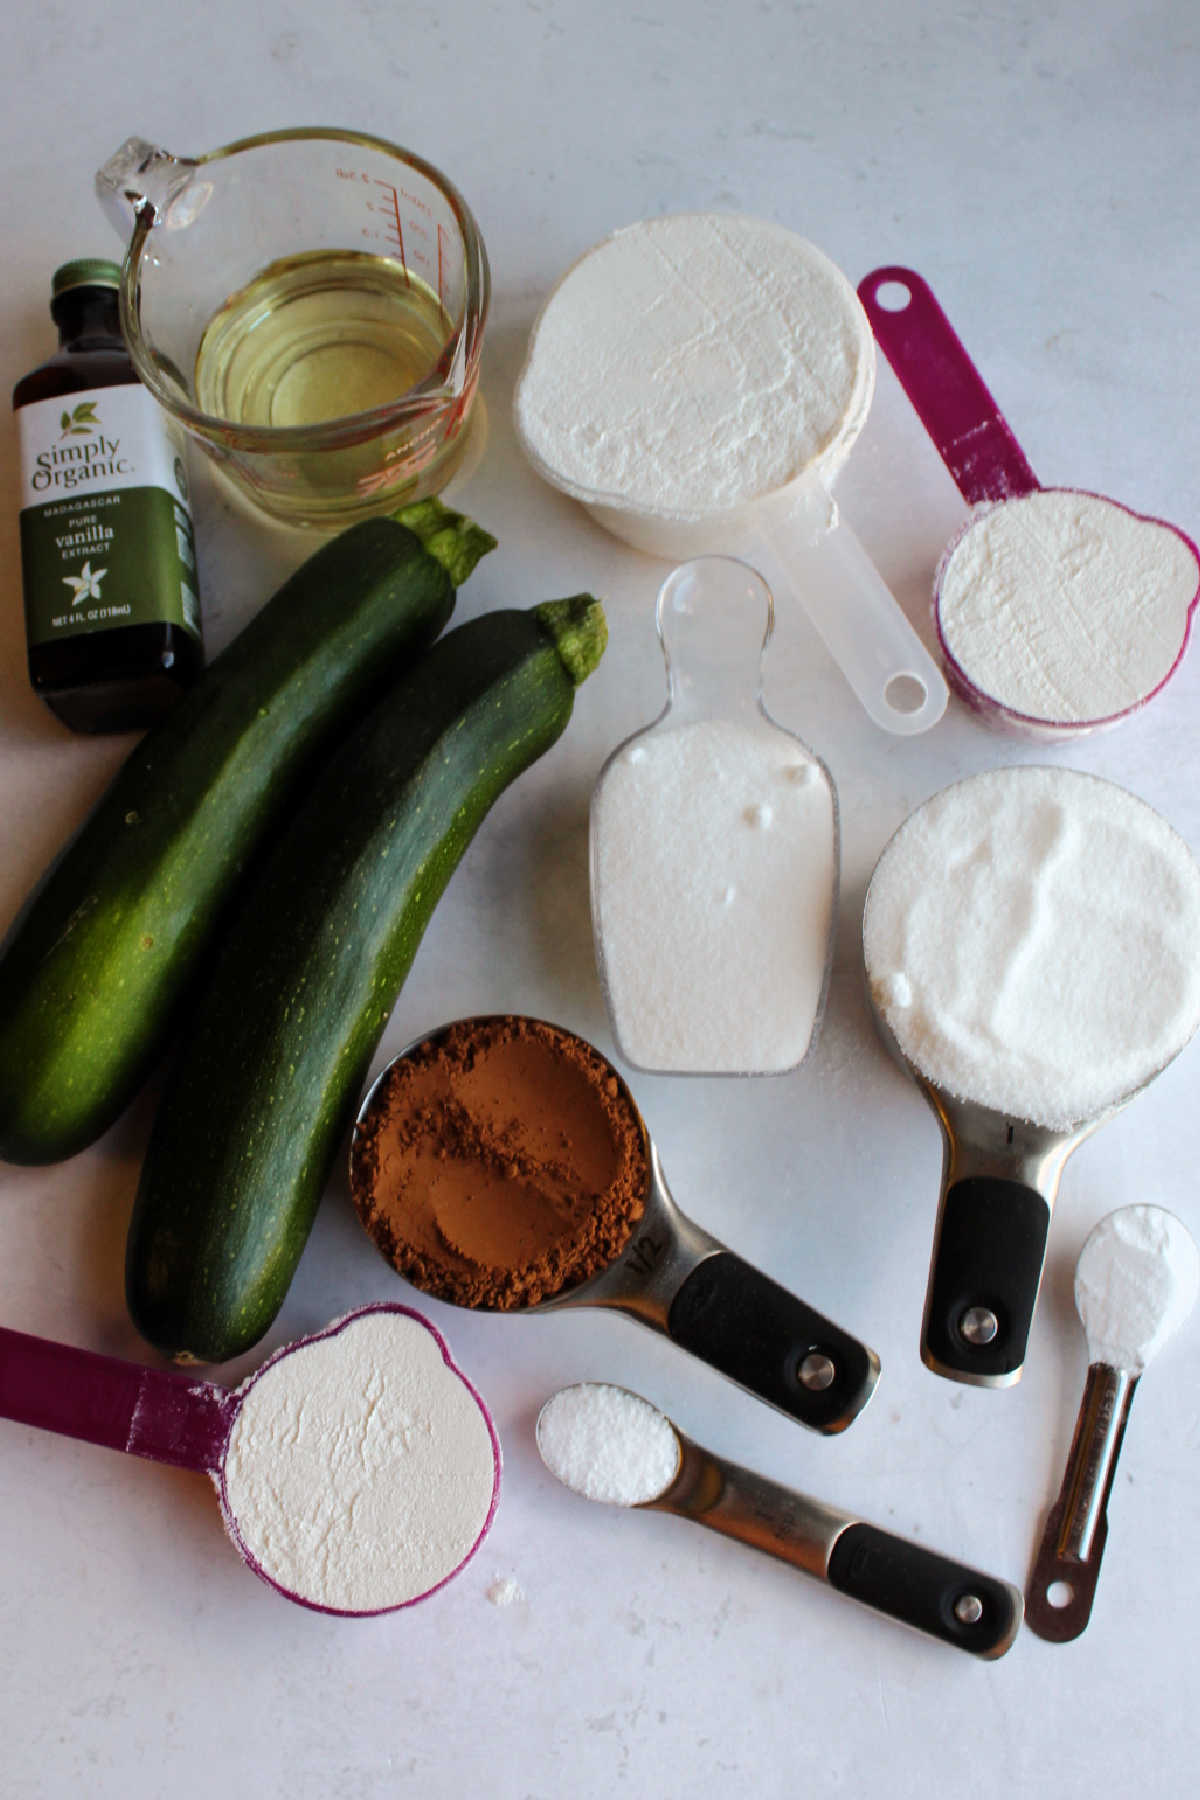 Ingredients ready to be made into chocolate zucchini cake.